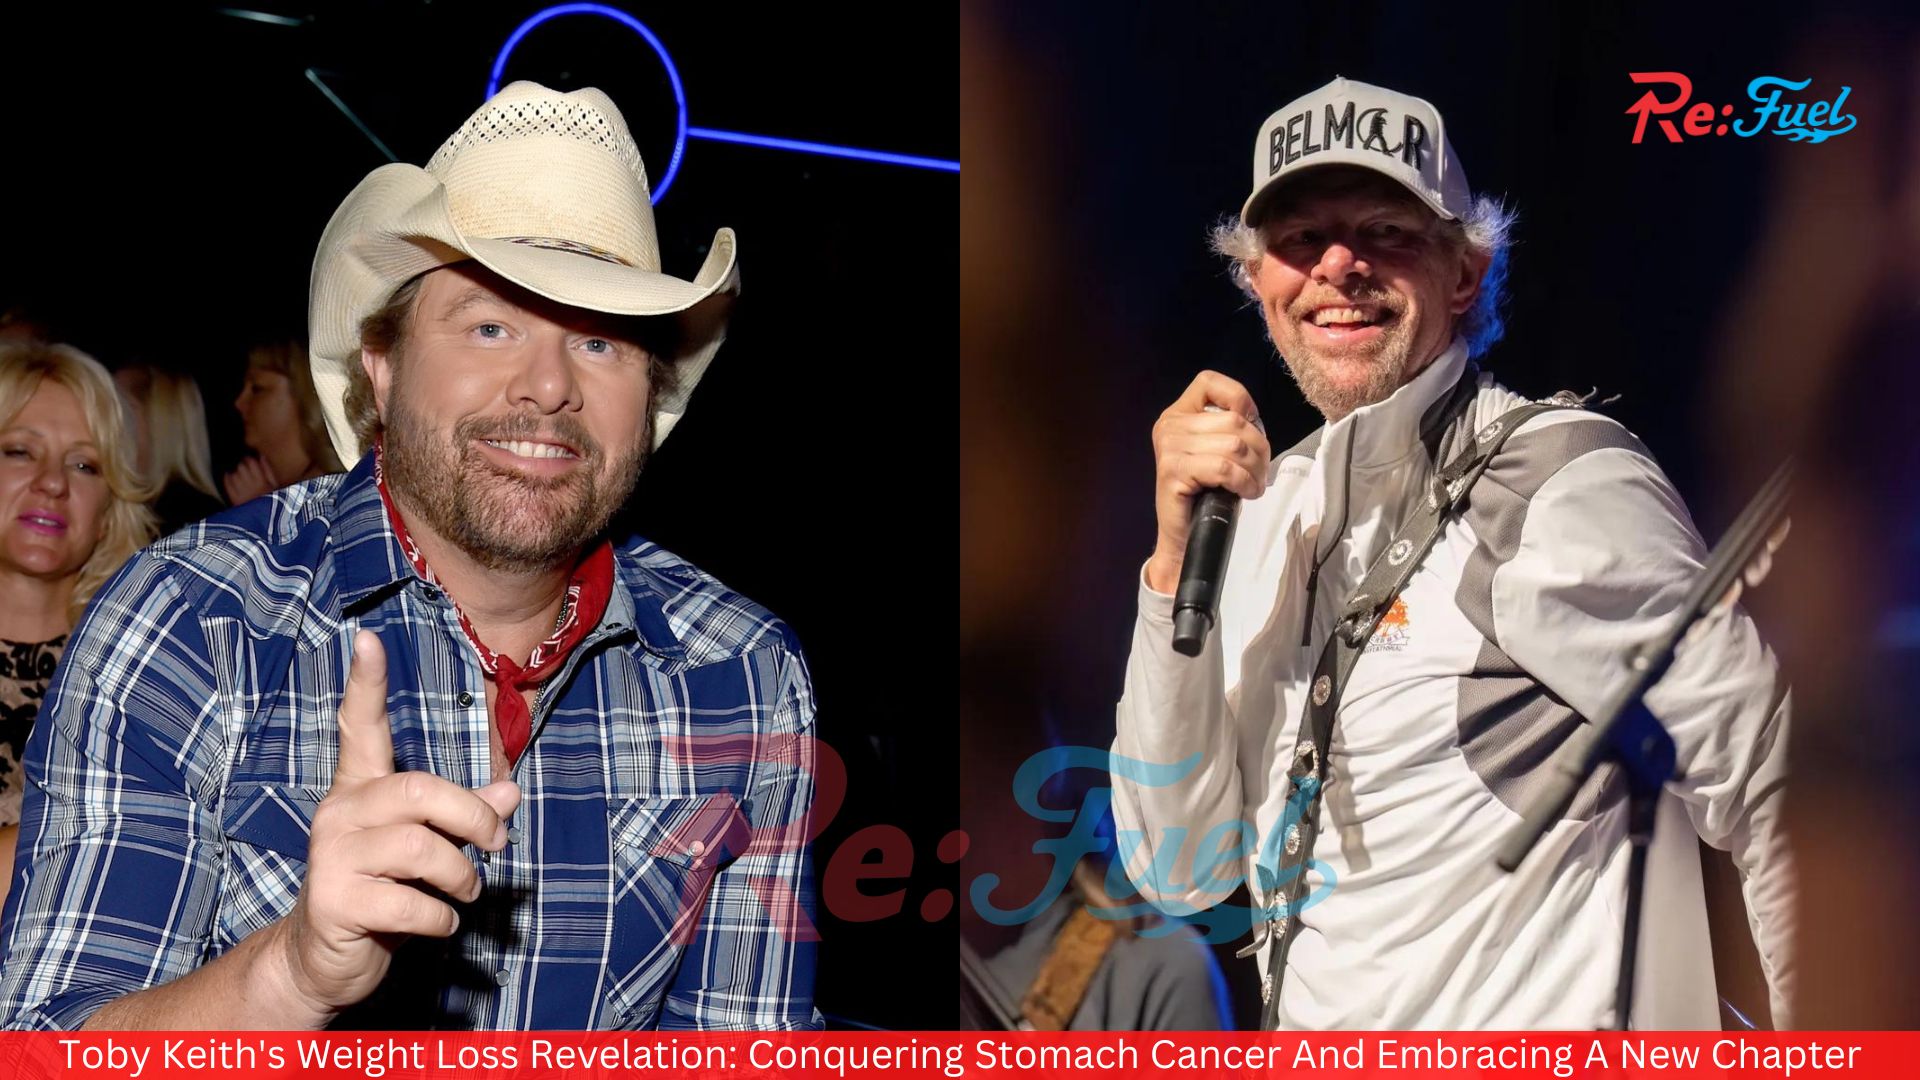 Toby Keith's Weight Loss Revelation: Conquering Stomach Cancer And Embracing A New Chapter